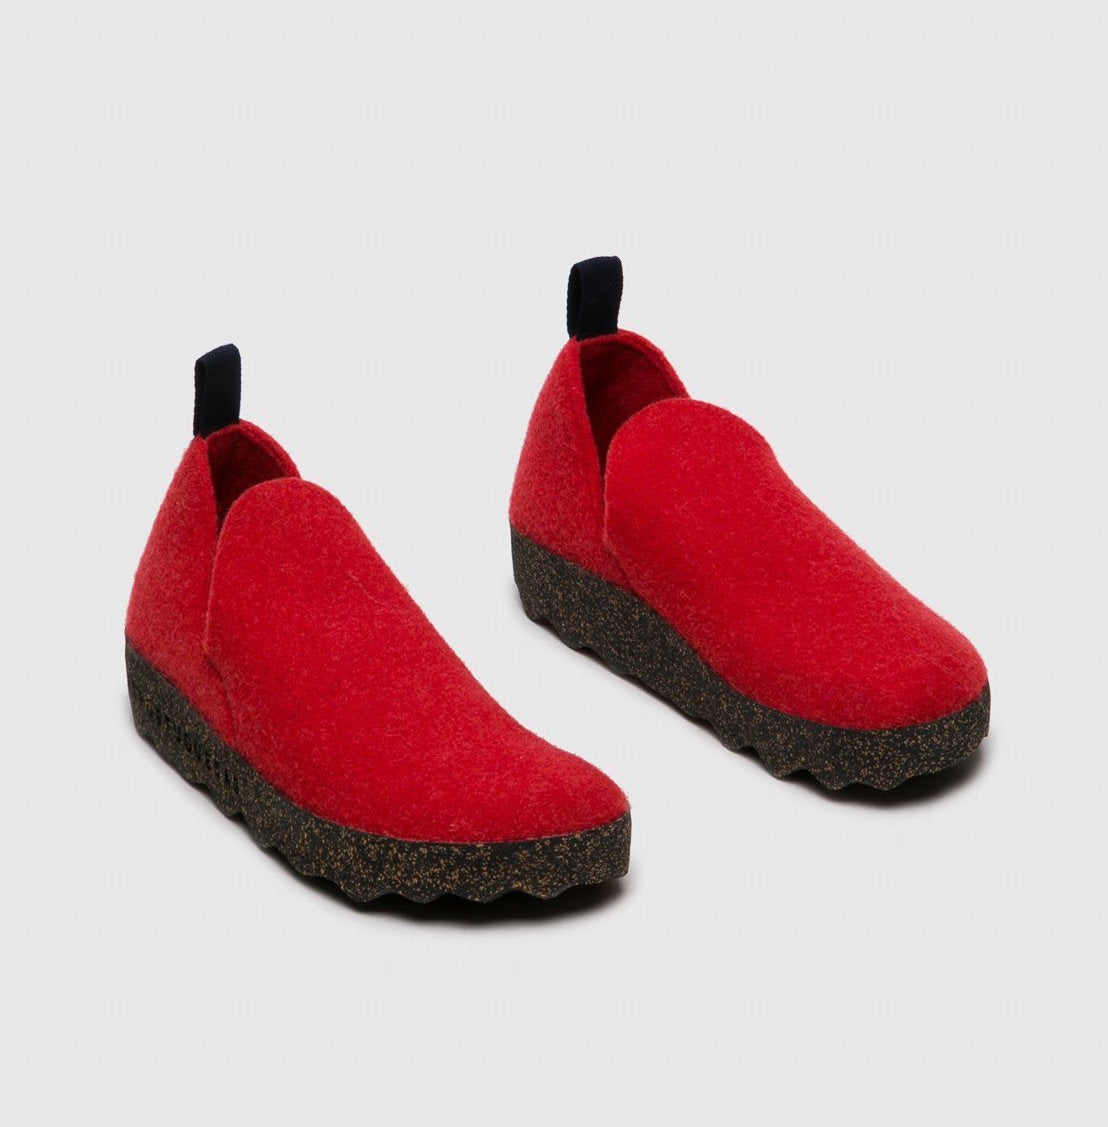 outer front side view of the asportuguesas city ankle boot in the color red. This boot has a wool/felt looking upper with side slits and a cork looking sole.